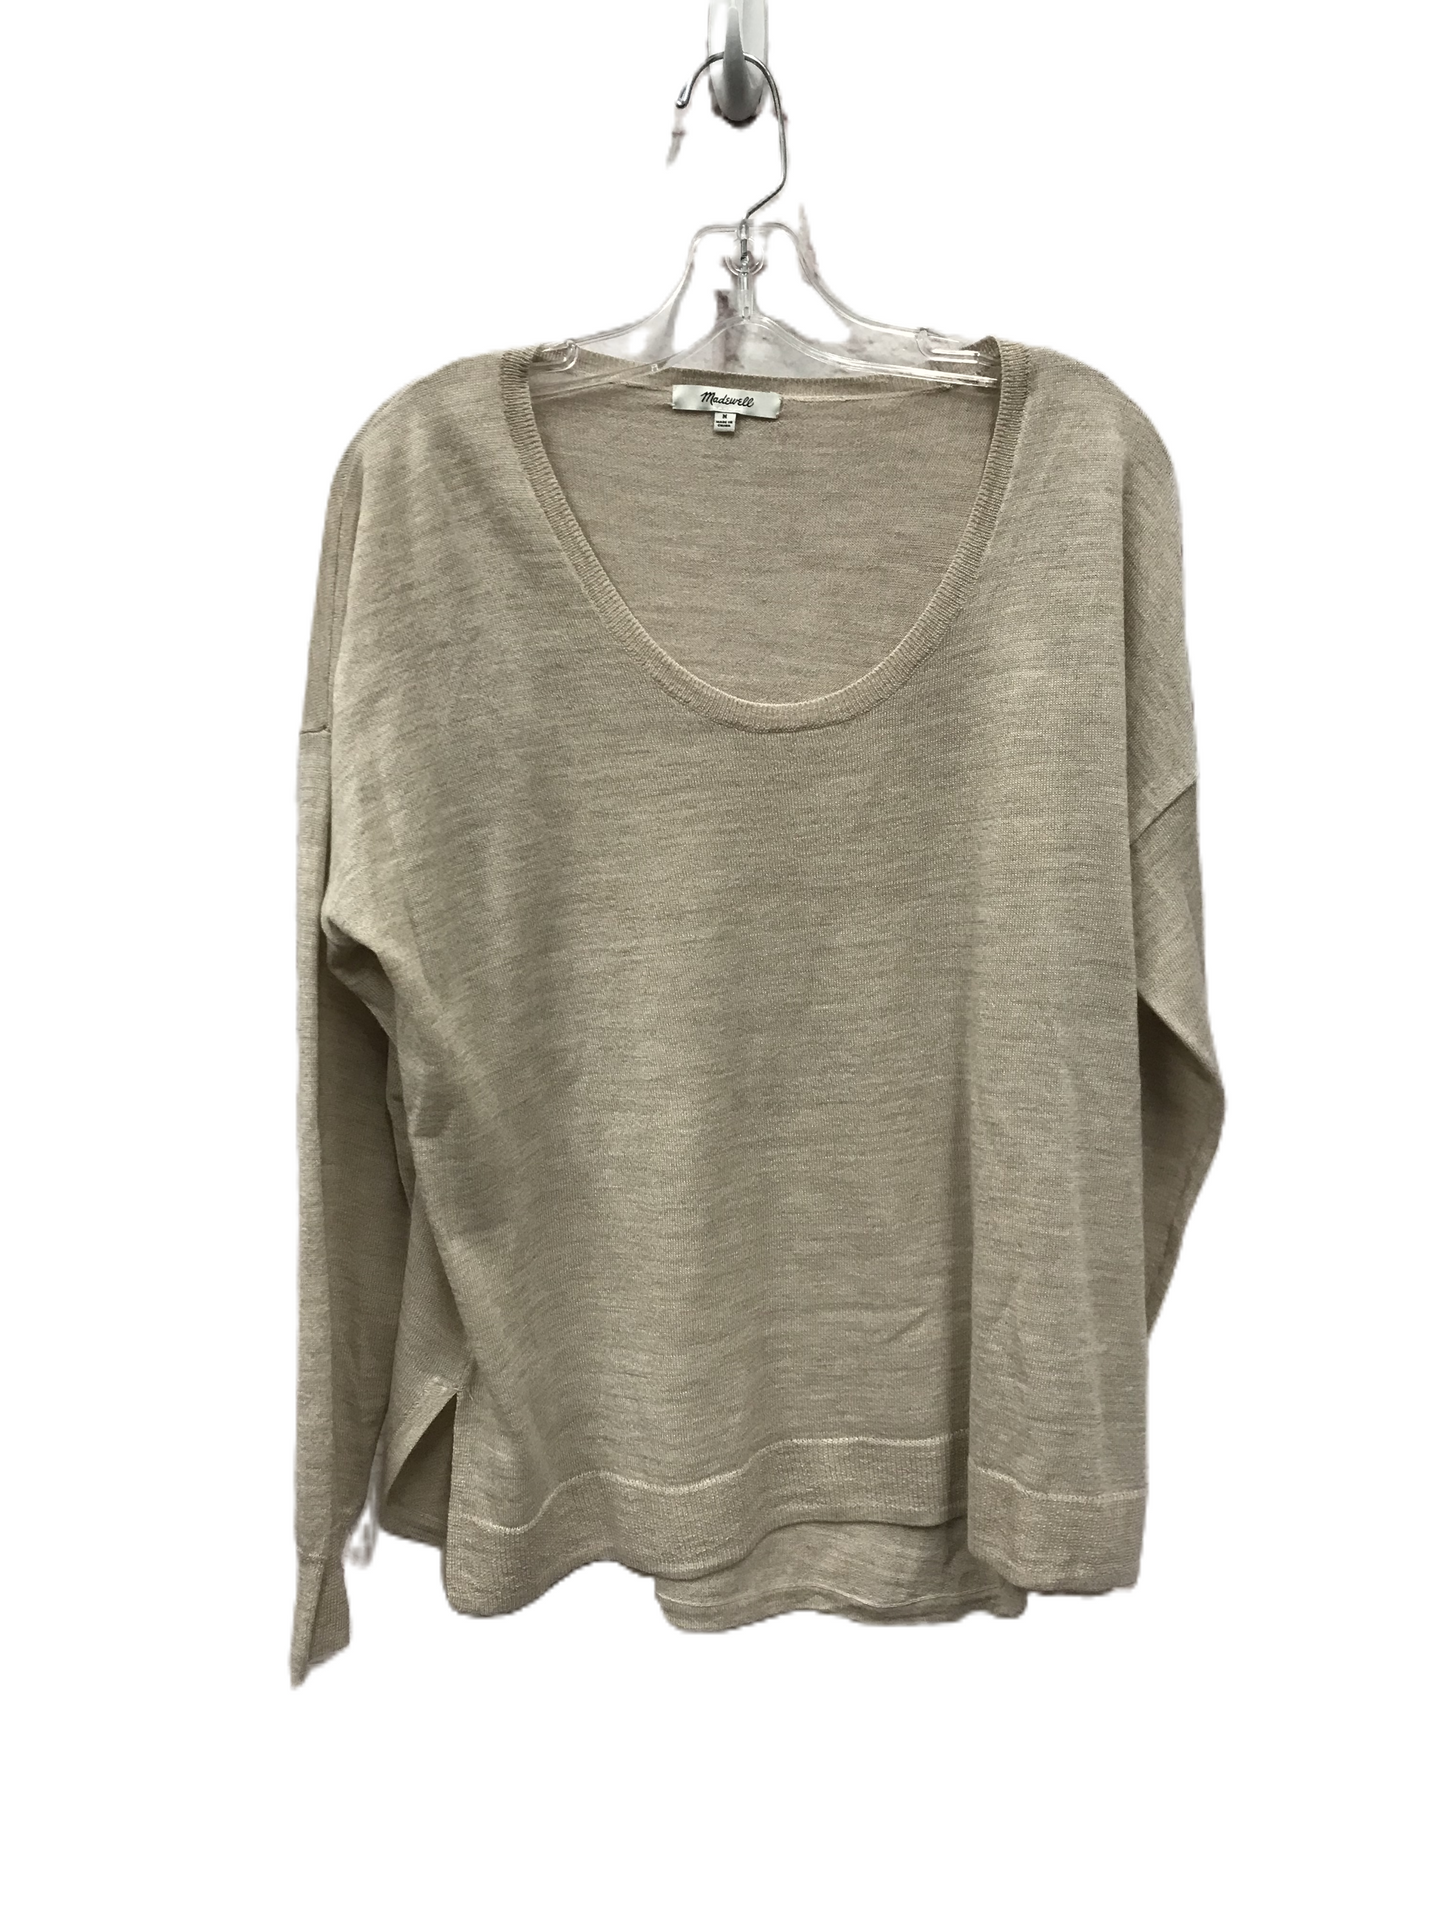 Tan Sweater By Madewell, Size: M